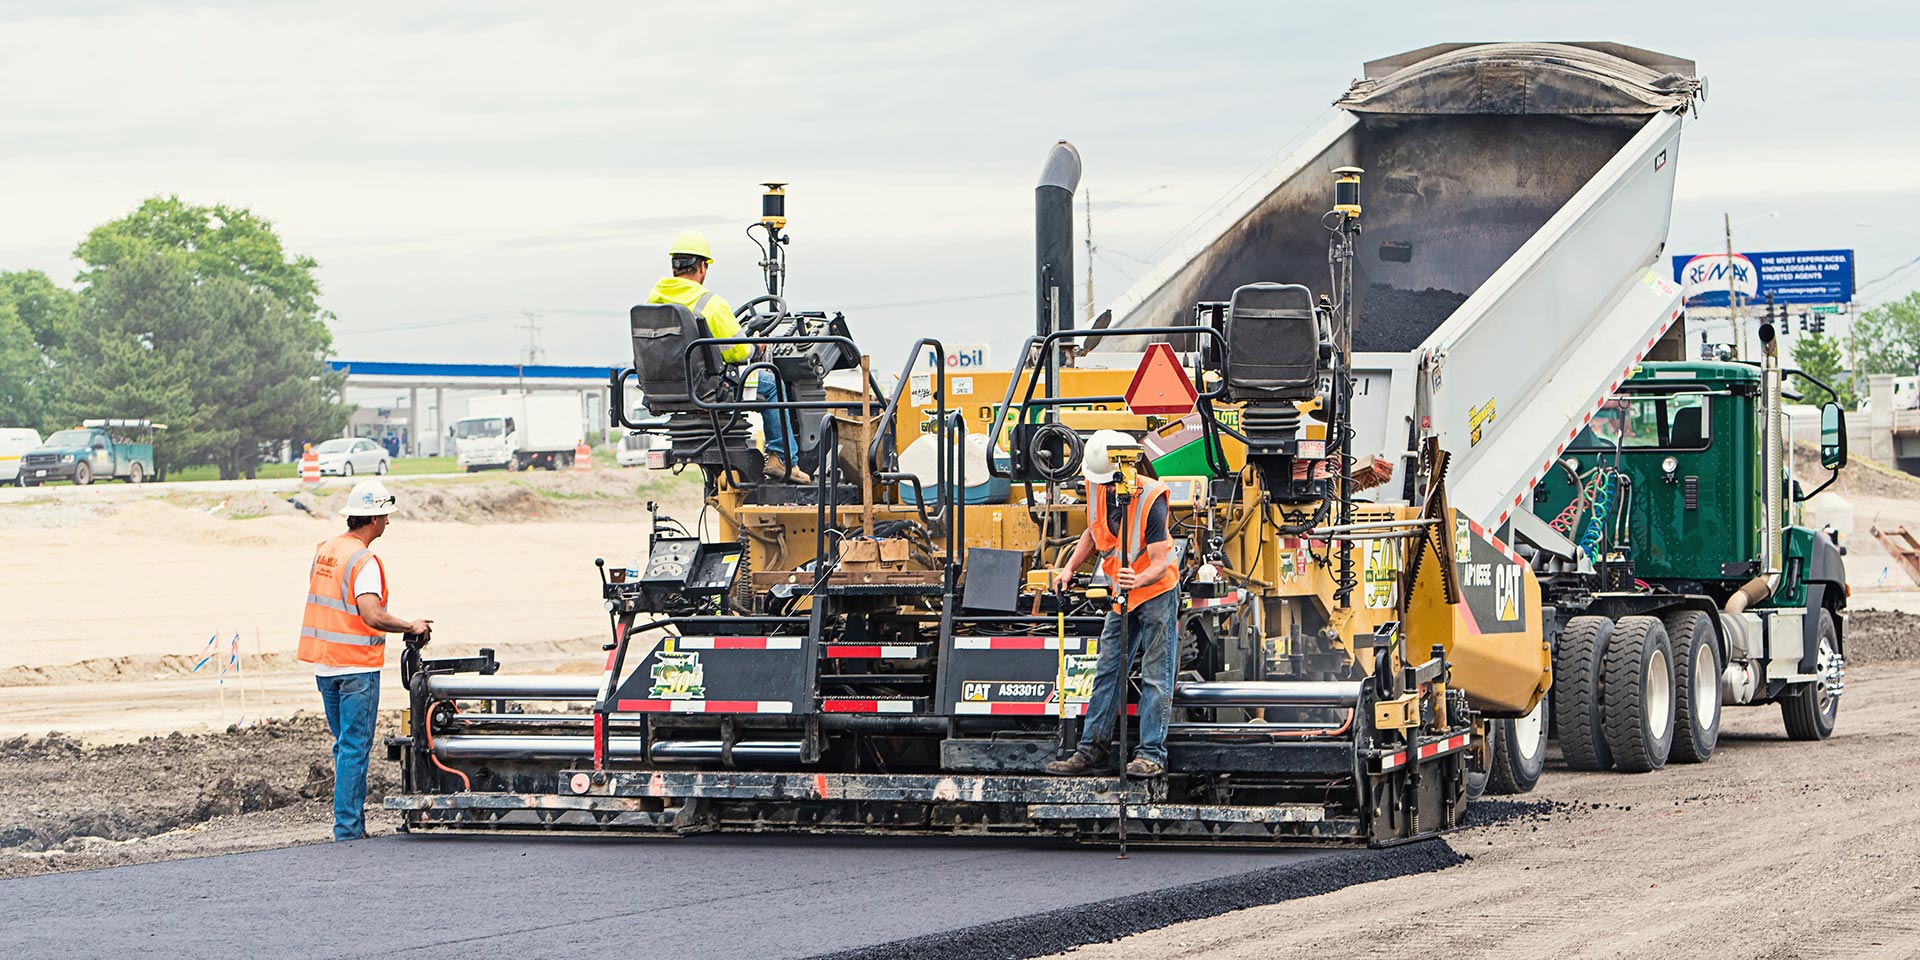 Asphalt paver automation systems for 2D and 3D paving projects